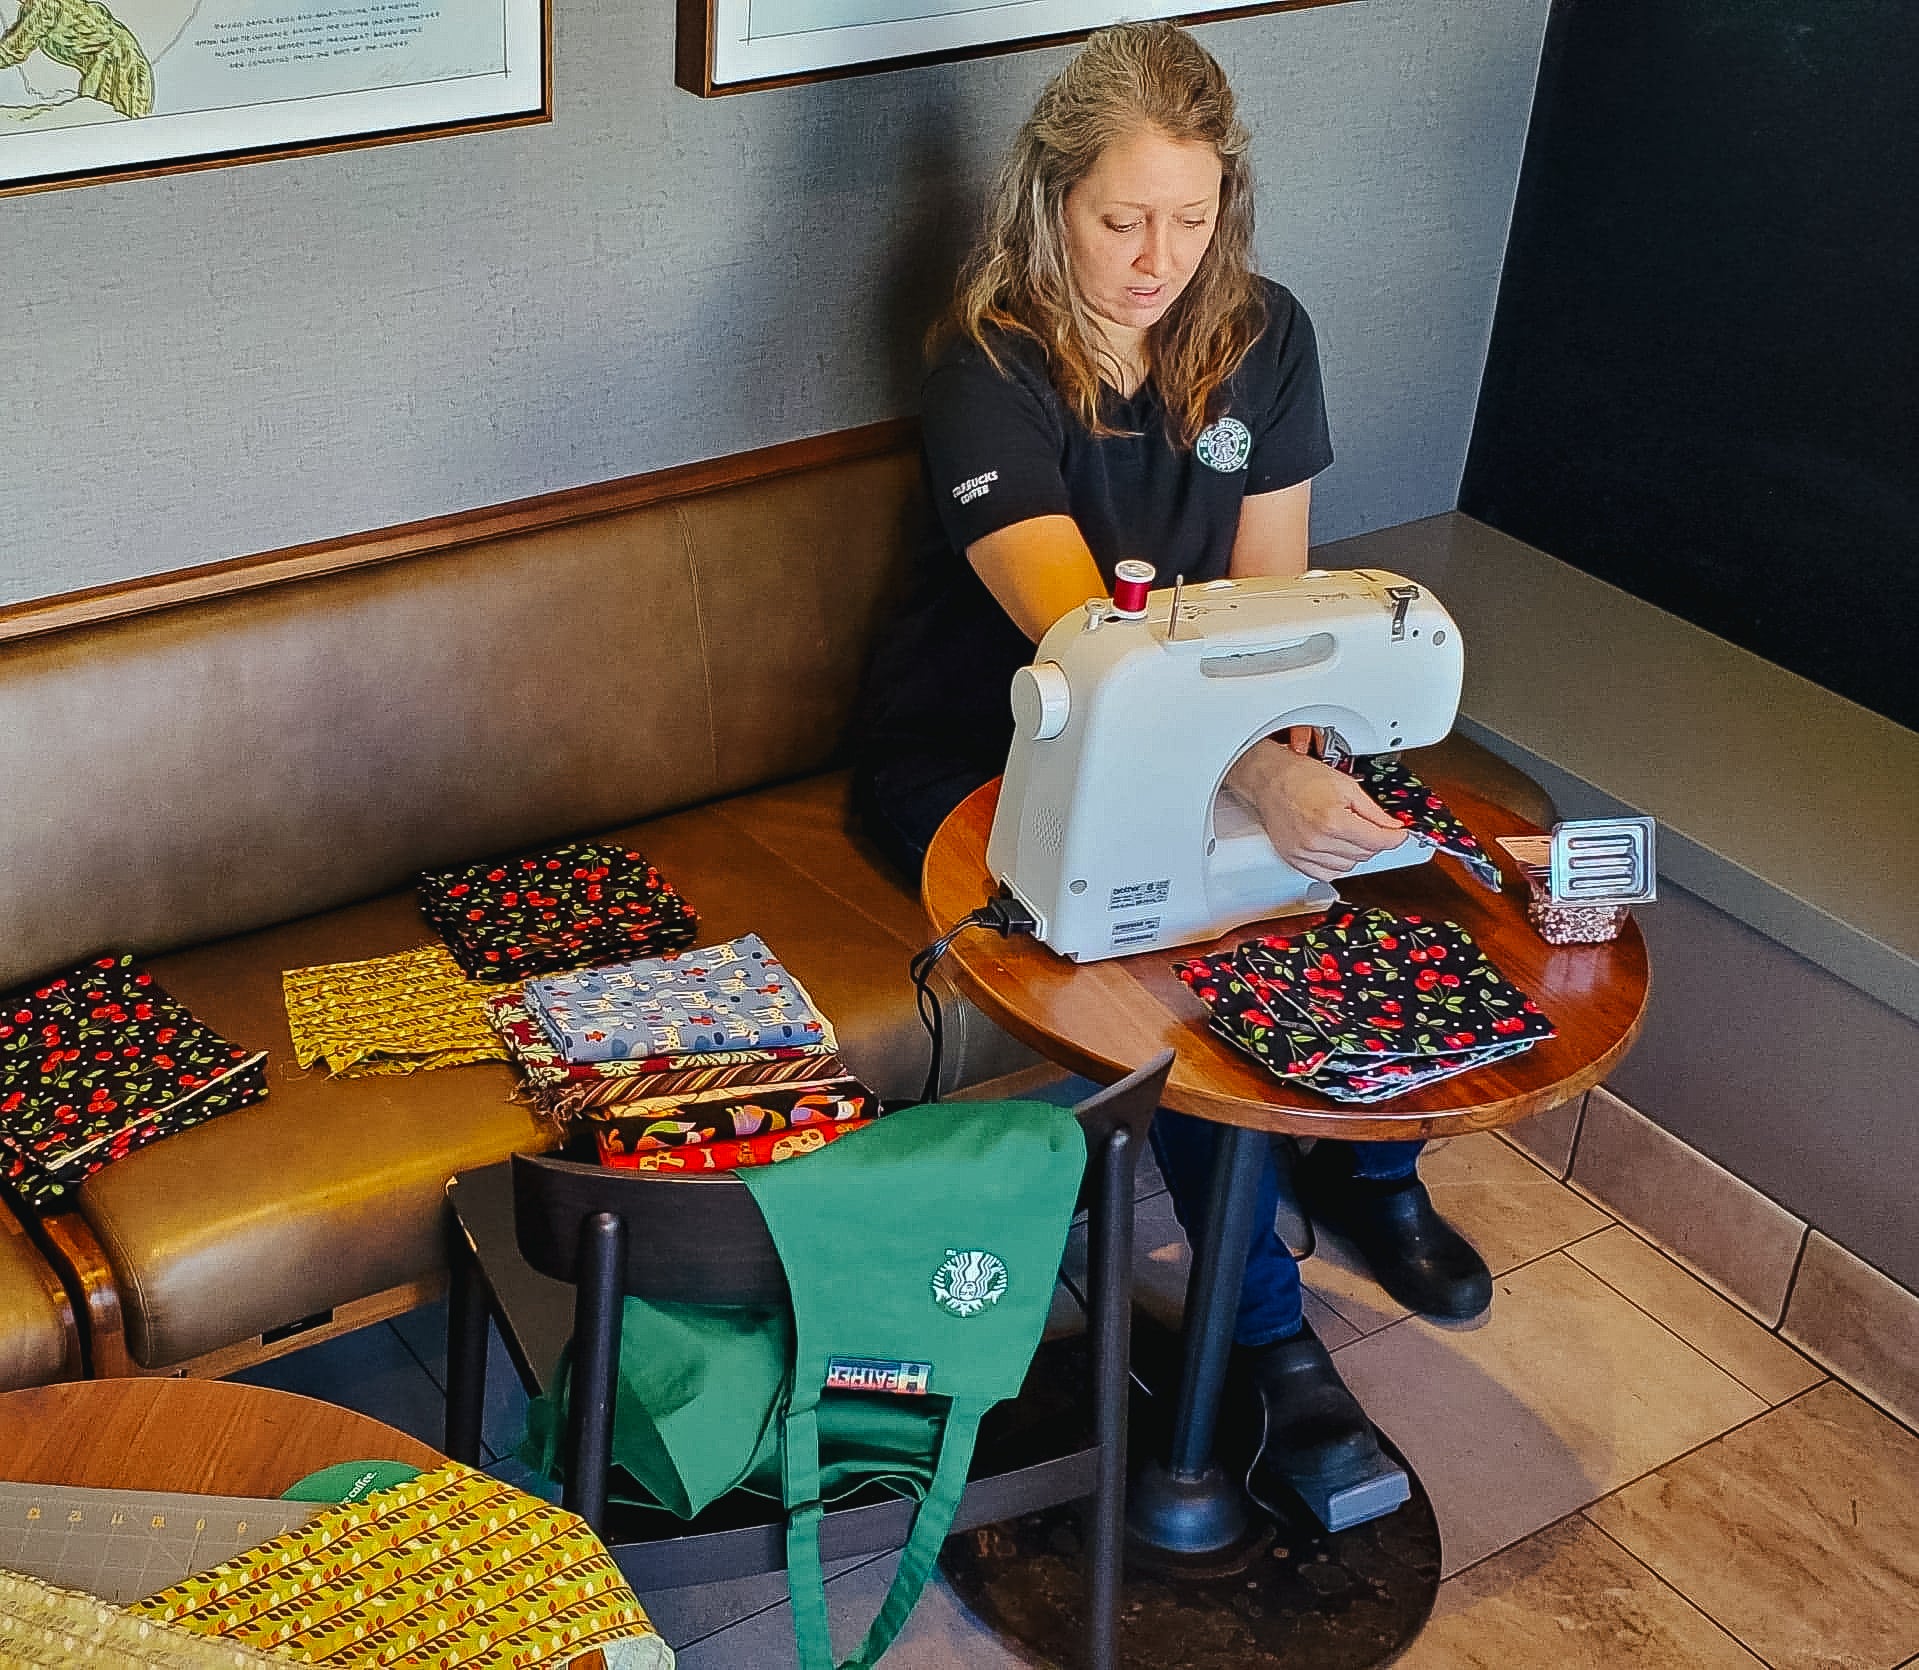 Starbucks Workers Using Closed Cafe To Sew Masks @themotleyfool #stocks $sbux photo